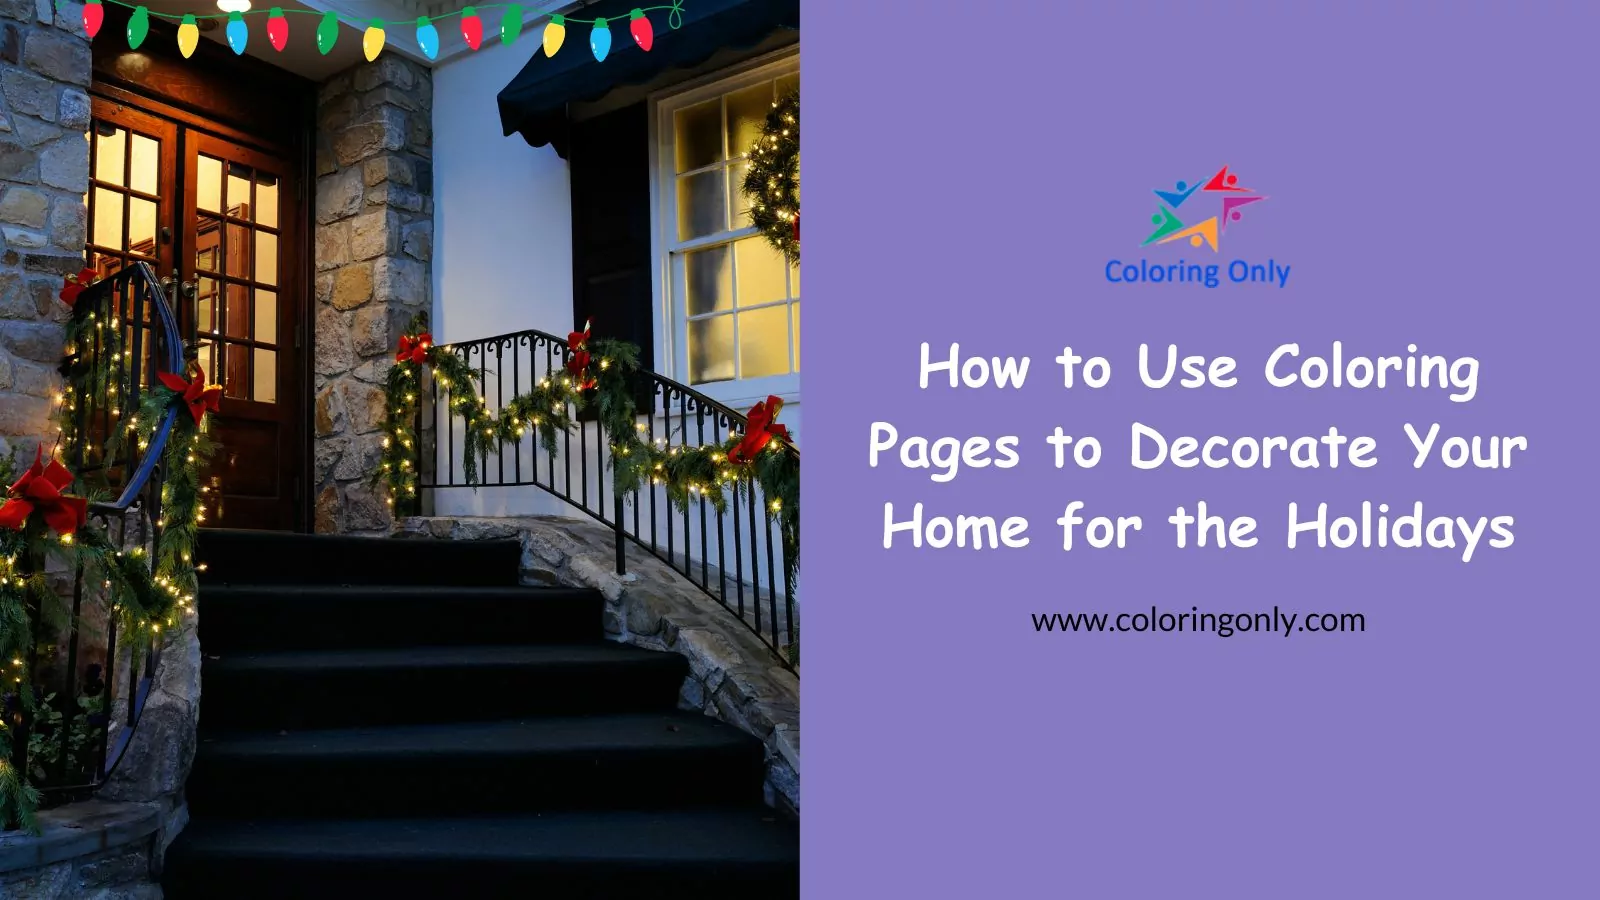 How to Use Coloring Pages to Decorate Your Home for the Holidays